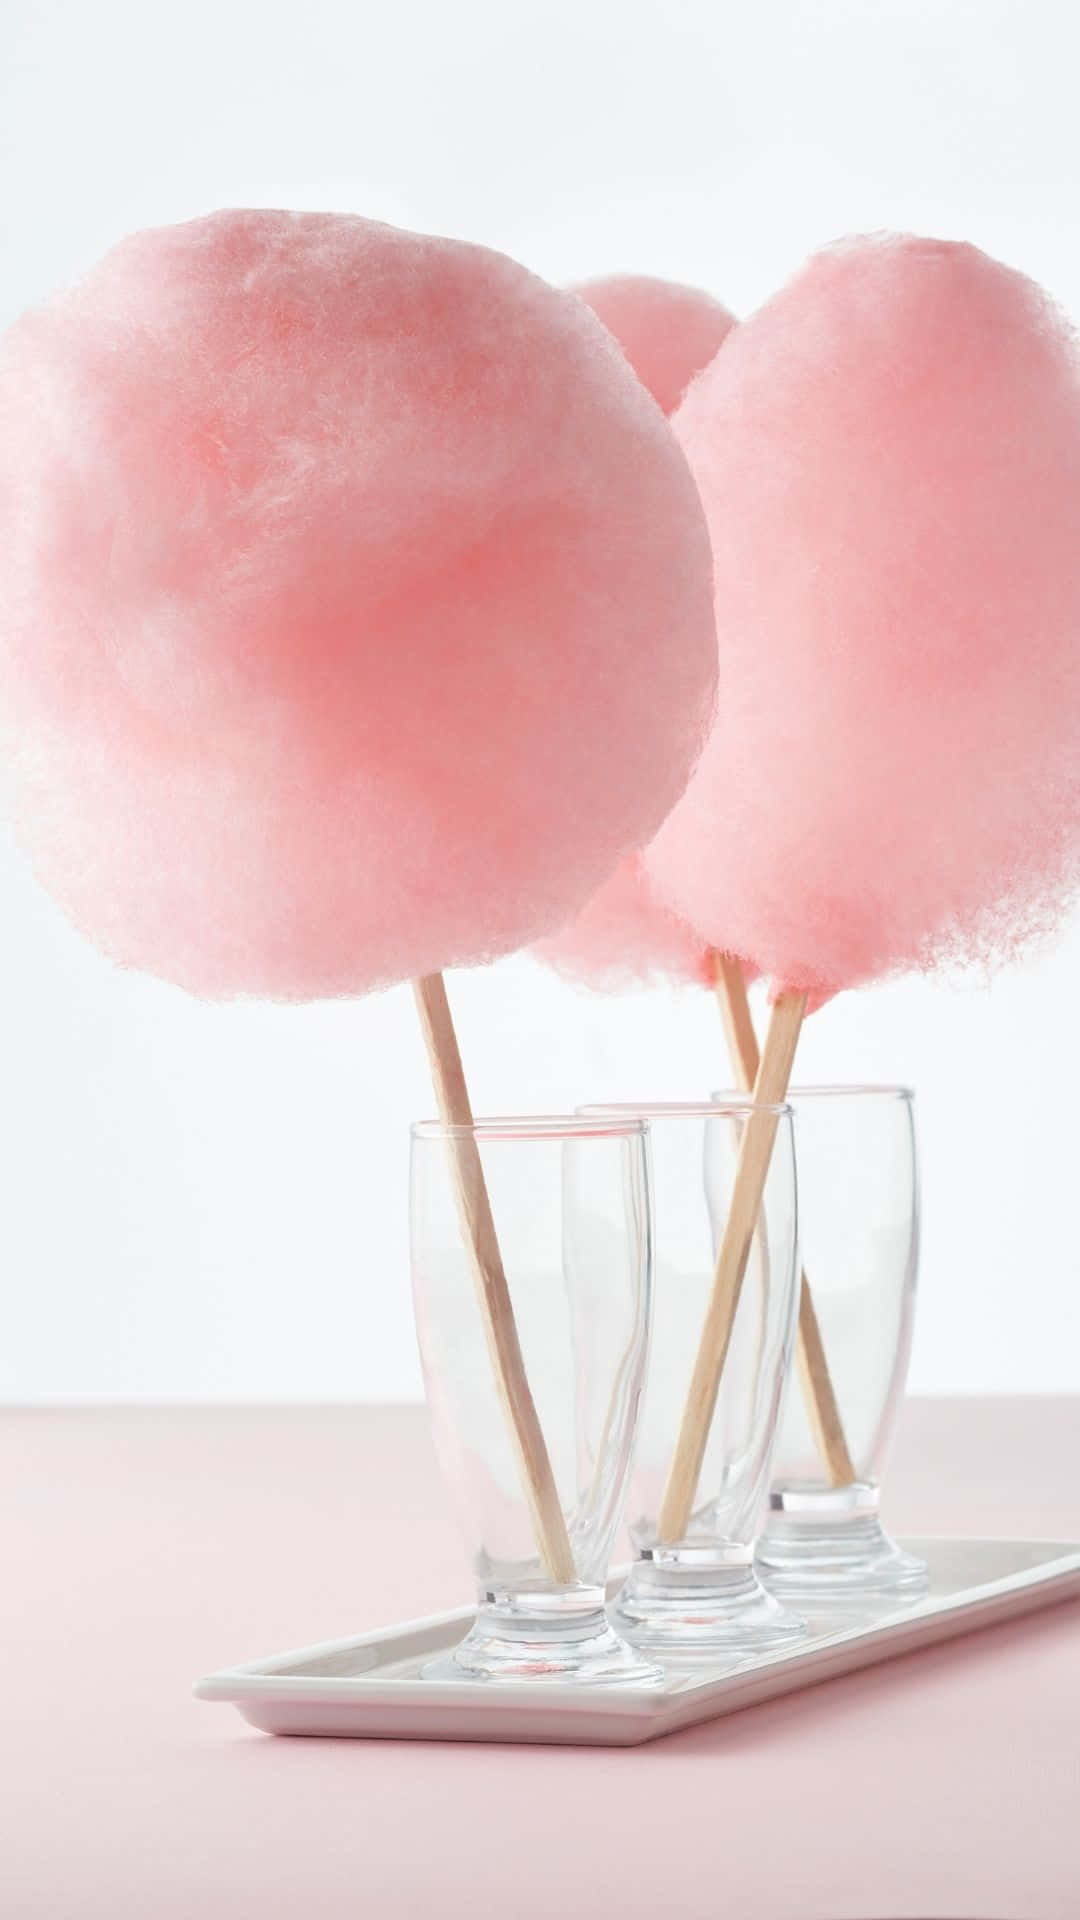 Fluffy Pink Cotton Candy Clouds Wallpaper